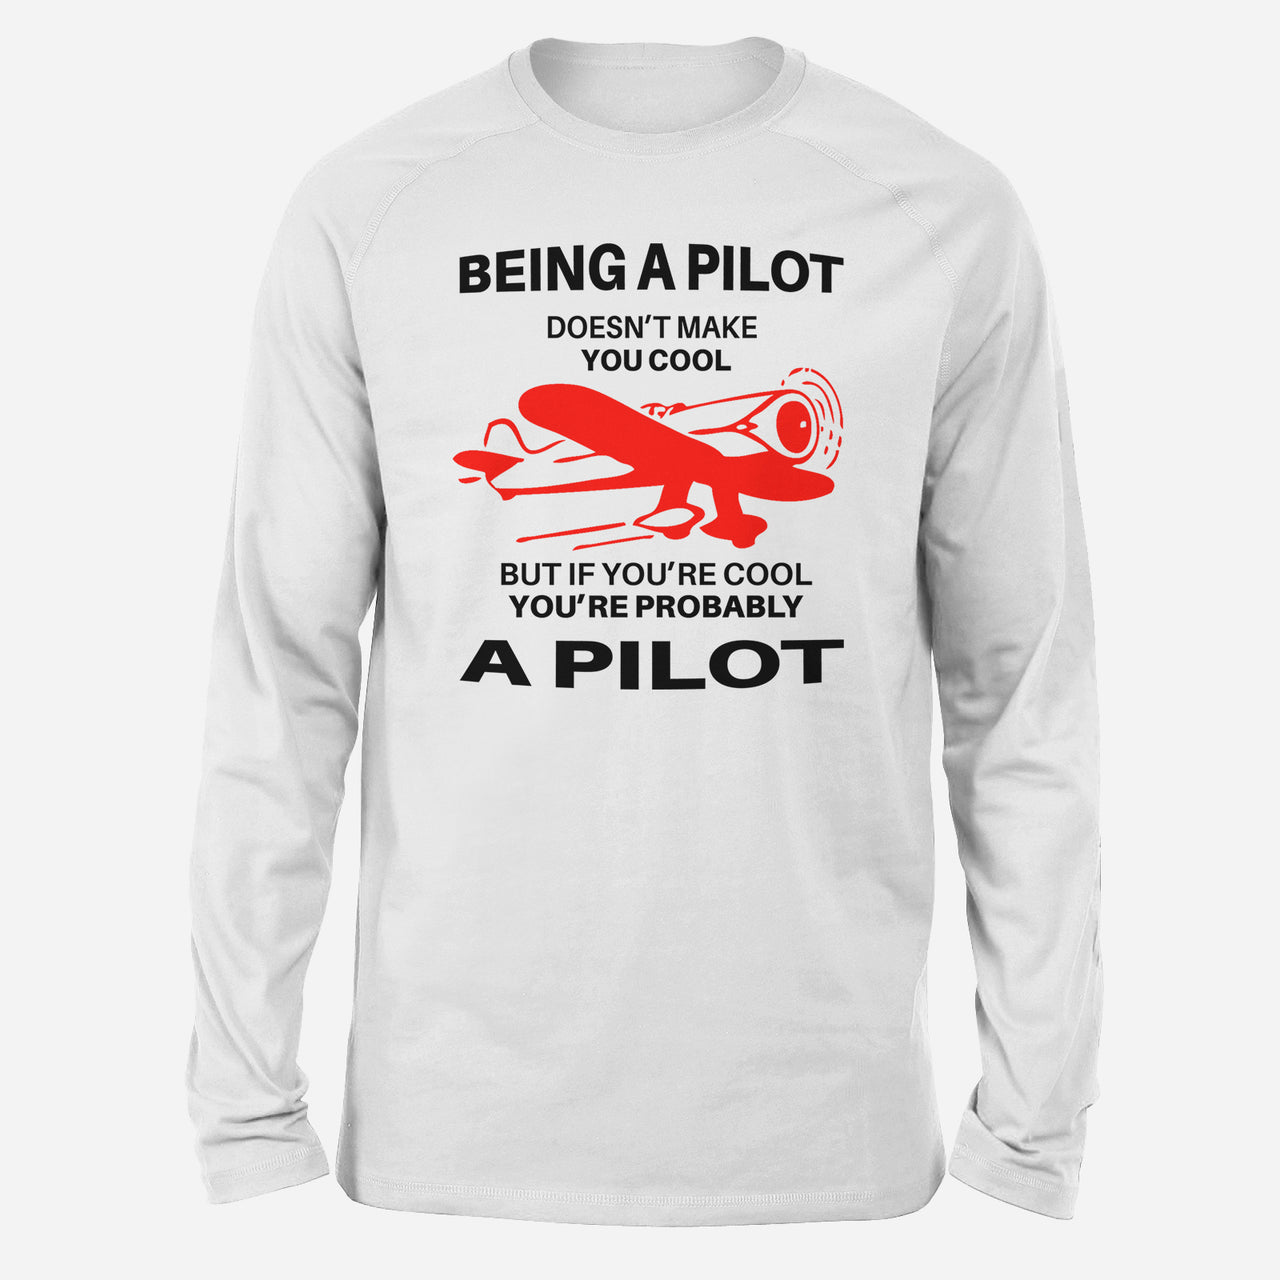 If You're Cool You're Probably a Pilot Designed Long-Sleeve T-Shirts